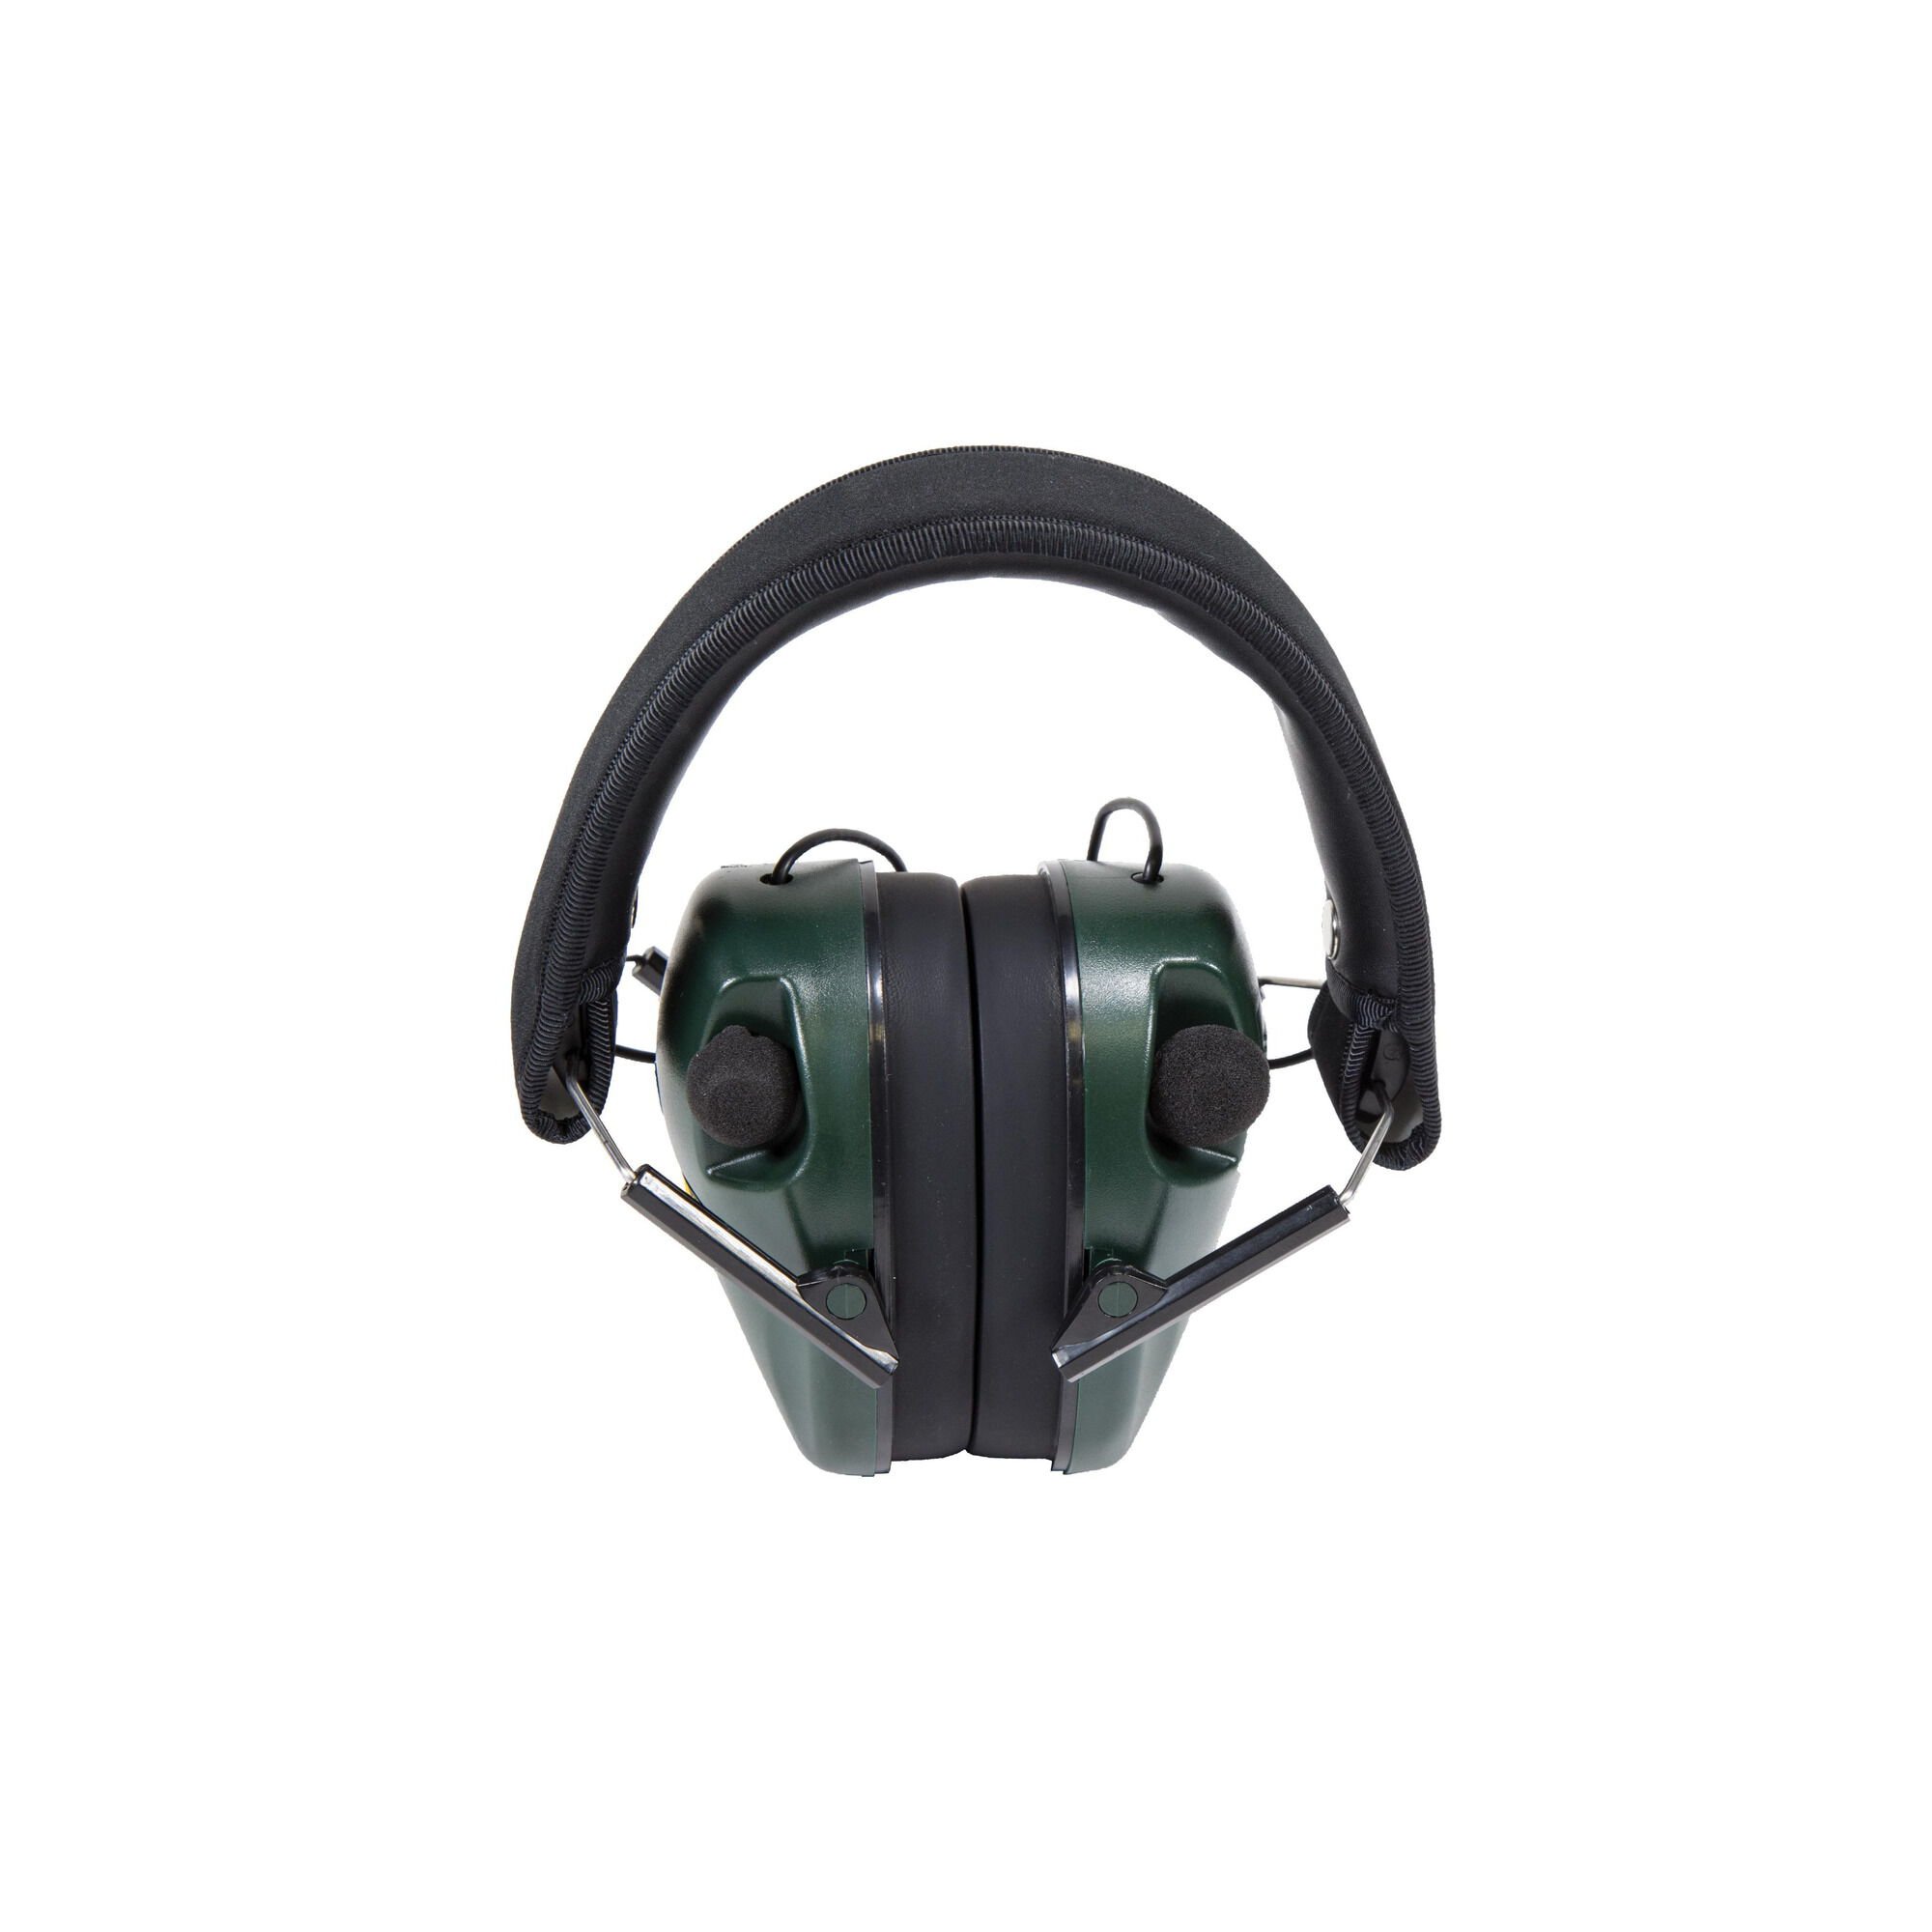 Caldwell E-Max Low Profile Electronic 20-23 NRR Hearing Protection with Sound 